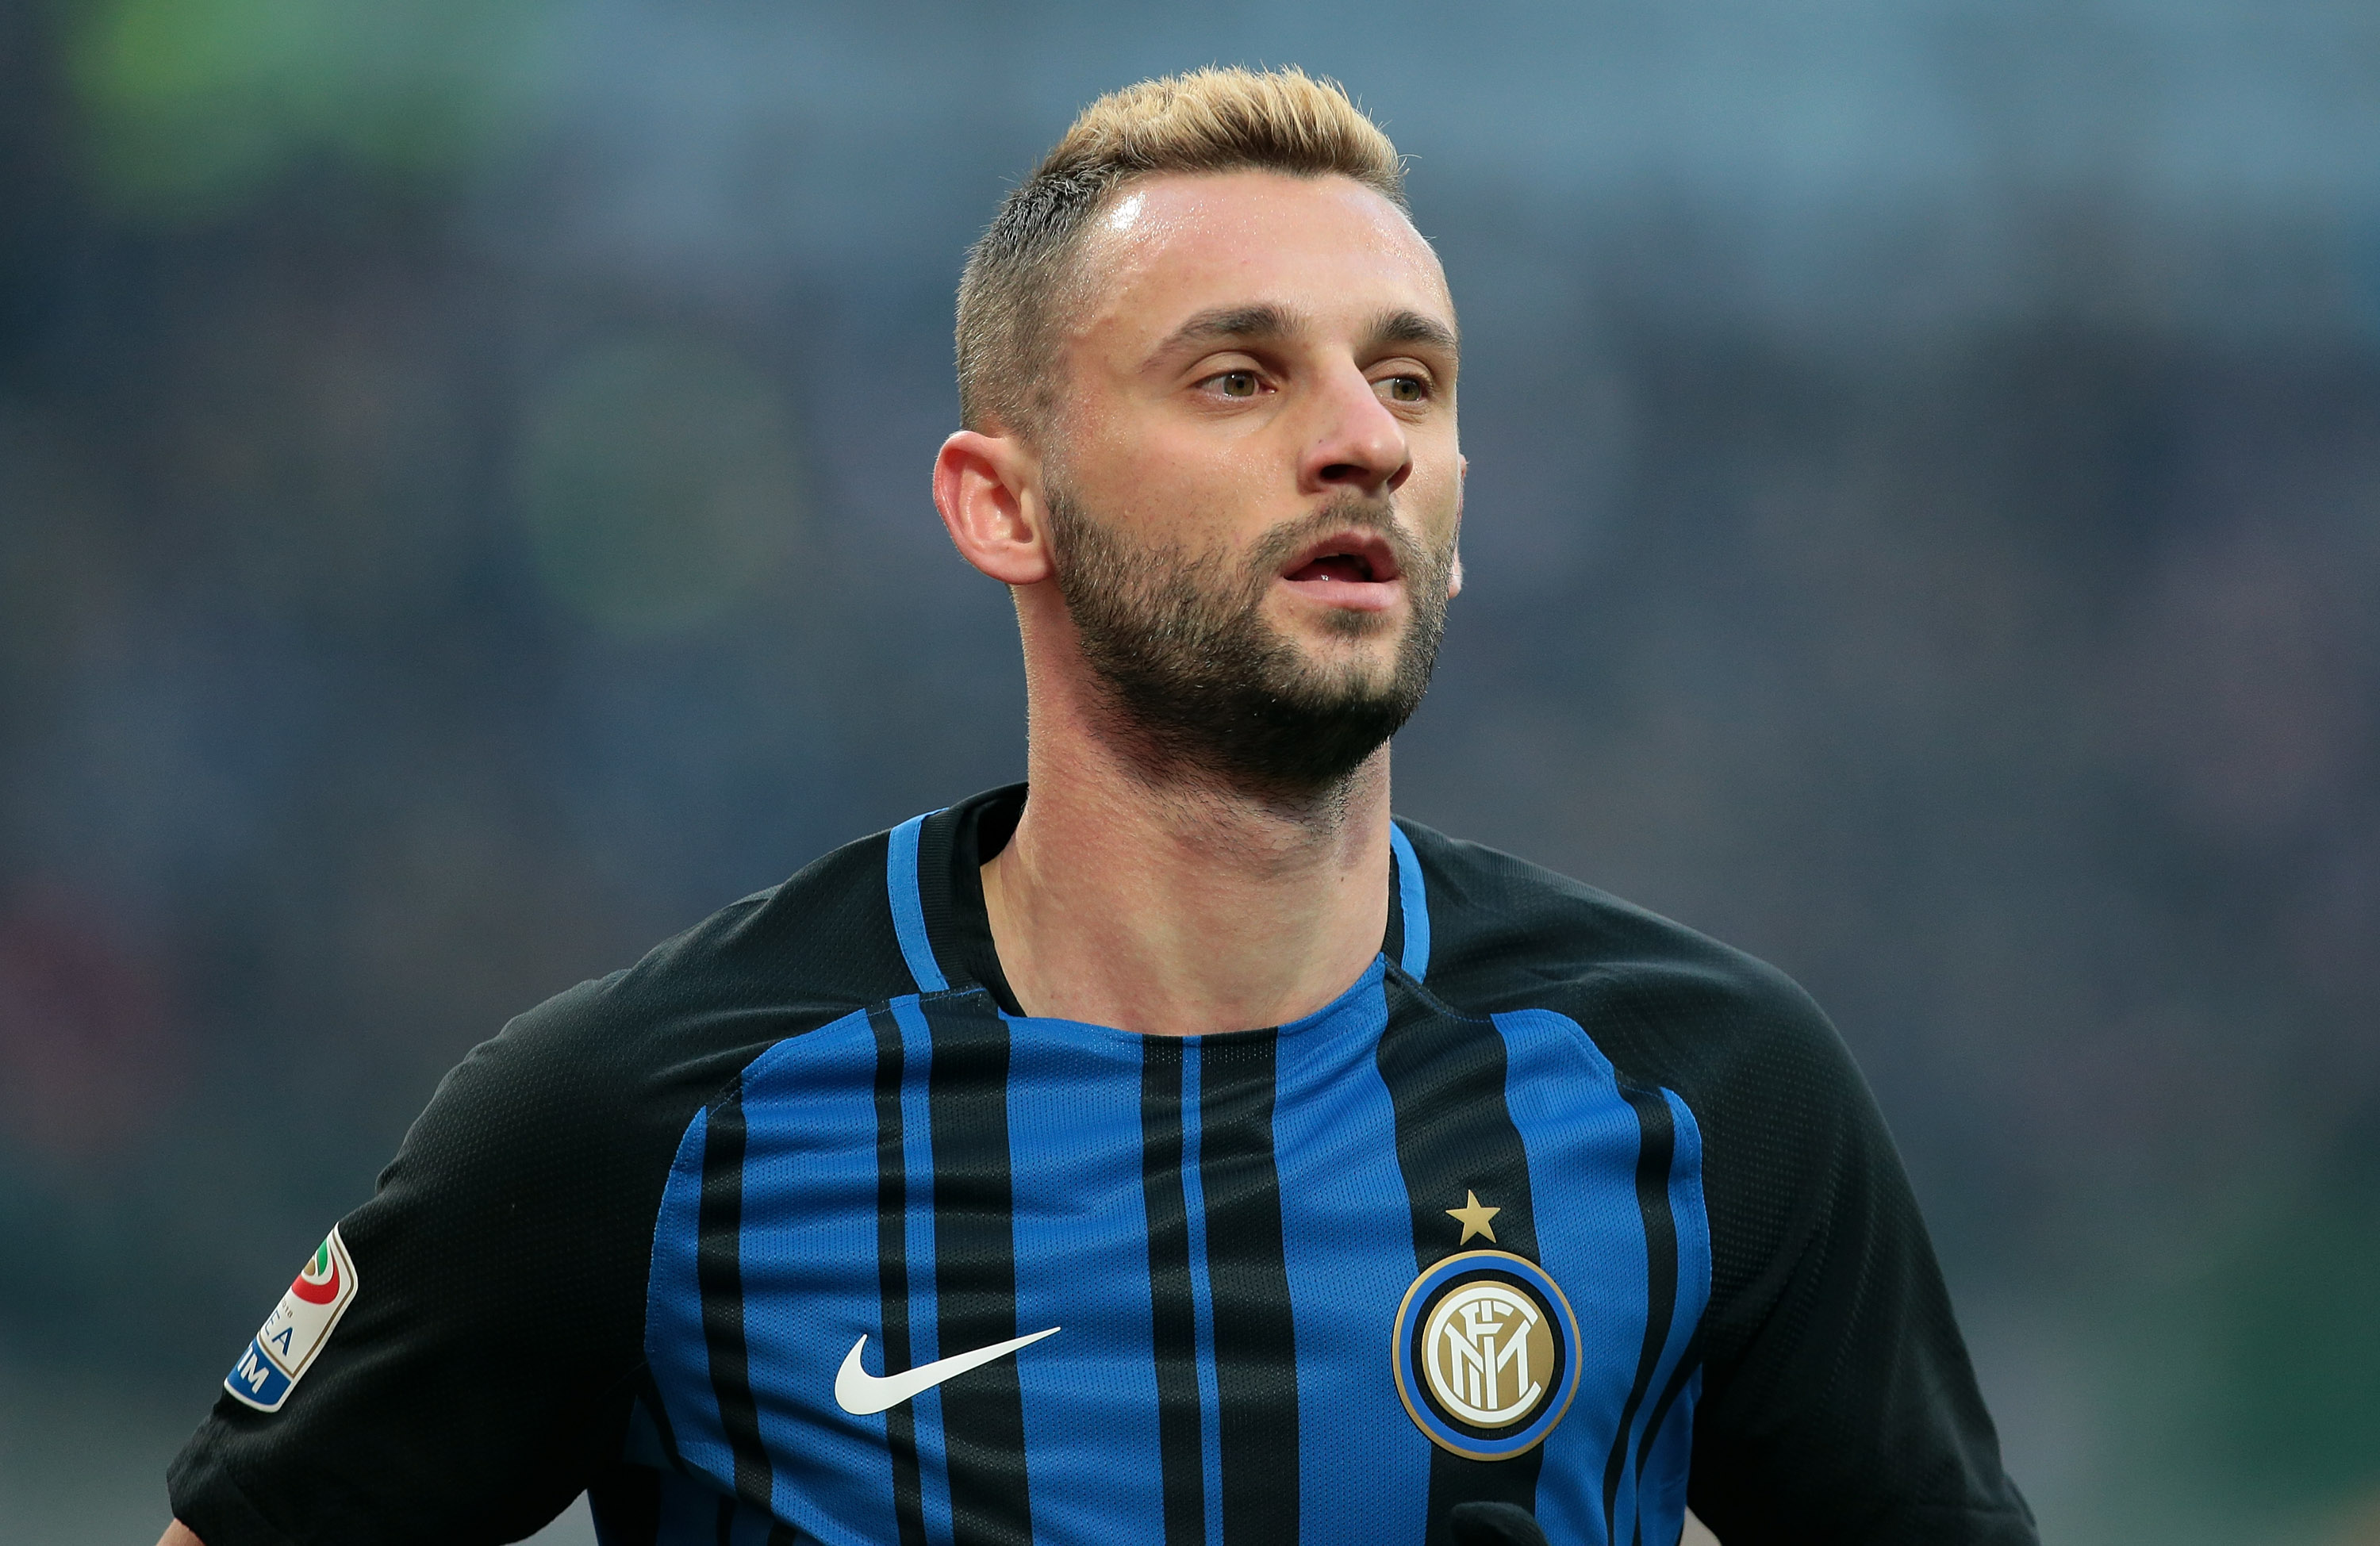 MILAN, ITALY - DECEMBER 03:  Marcelo Brozovic of FC Internazionale Milano looks on during the Serie A match between FC Internazionale and AC Chievo Verona at Stadio Giuseppe Meazza on December 3, 2017 in Milan, Italy.  (Photo by Emilio Andreoli/Getty Images)